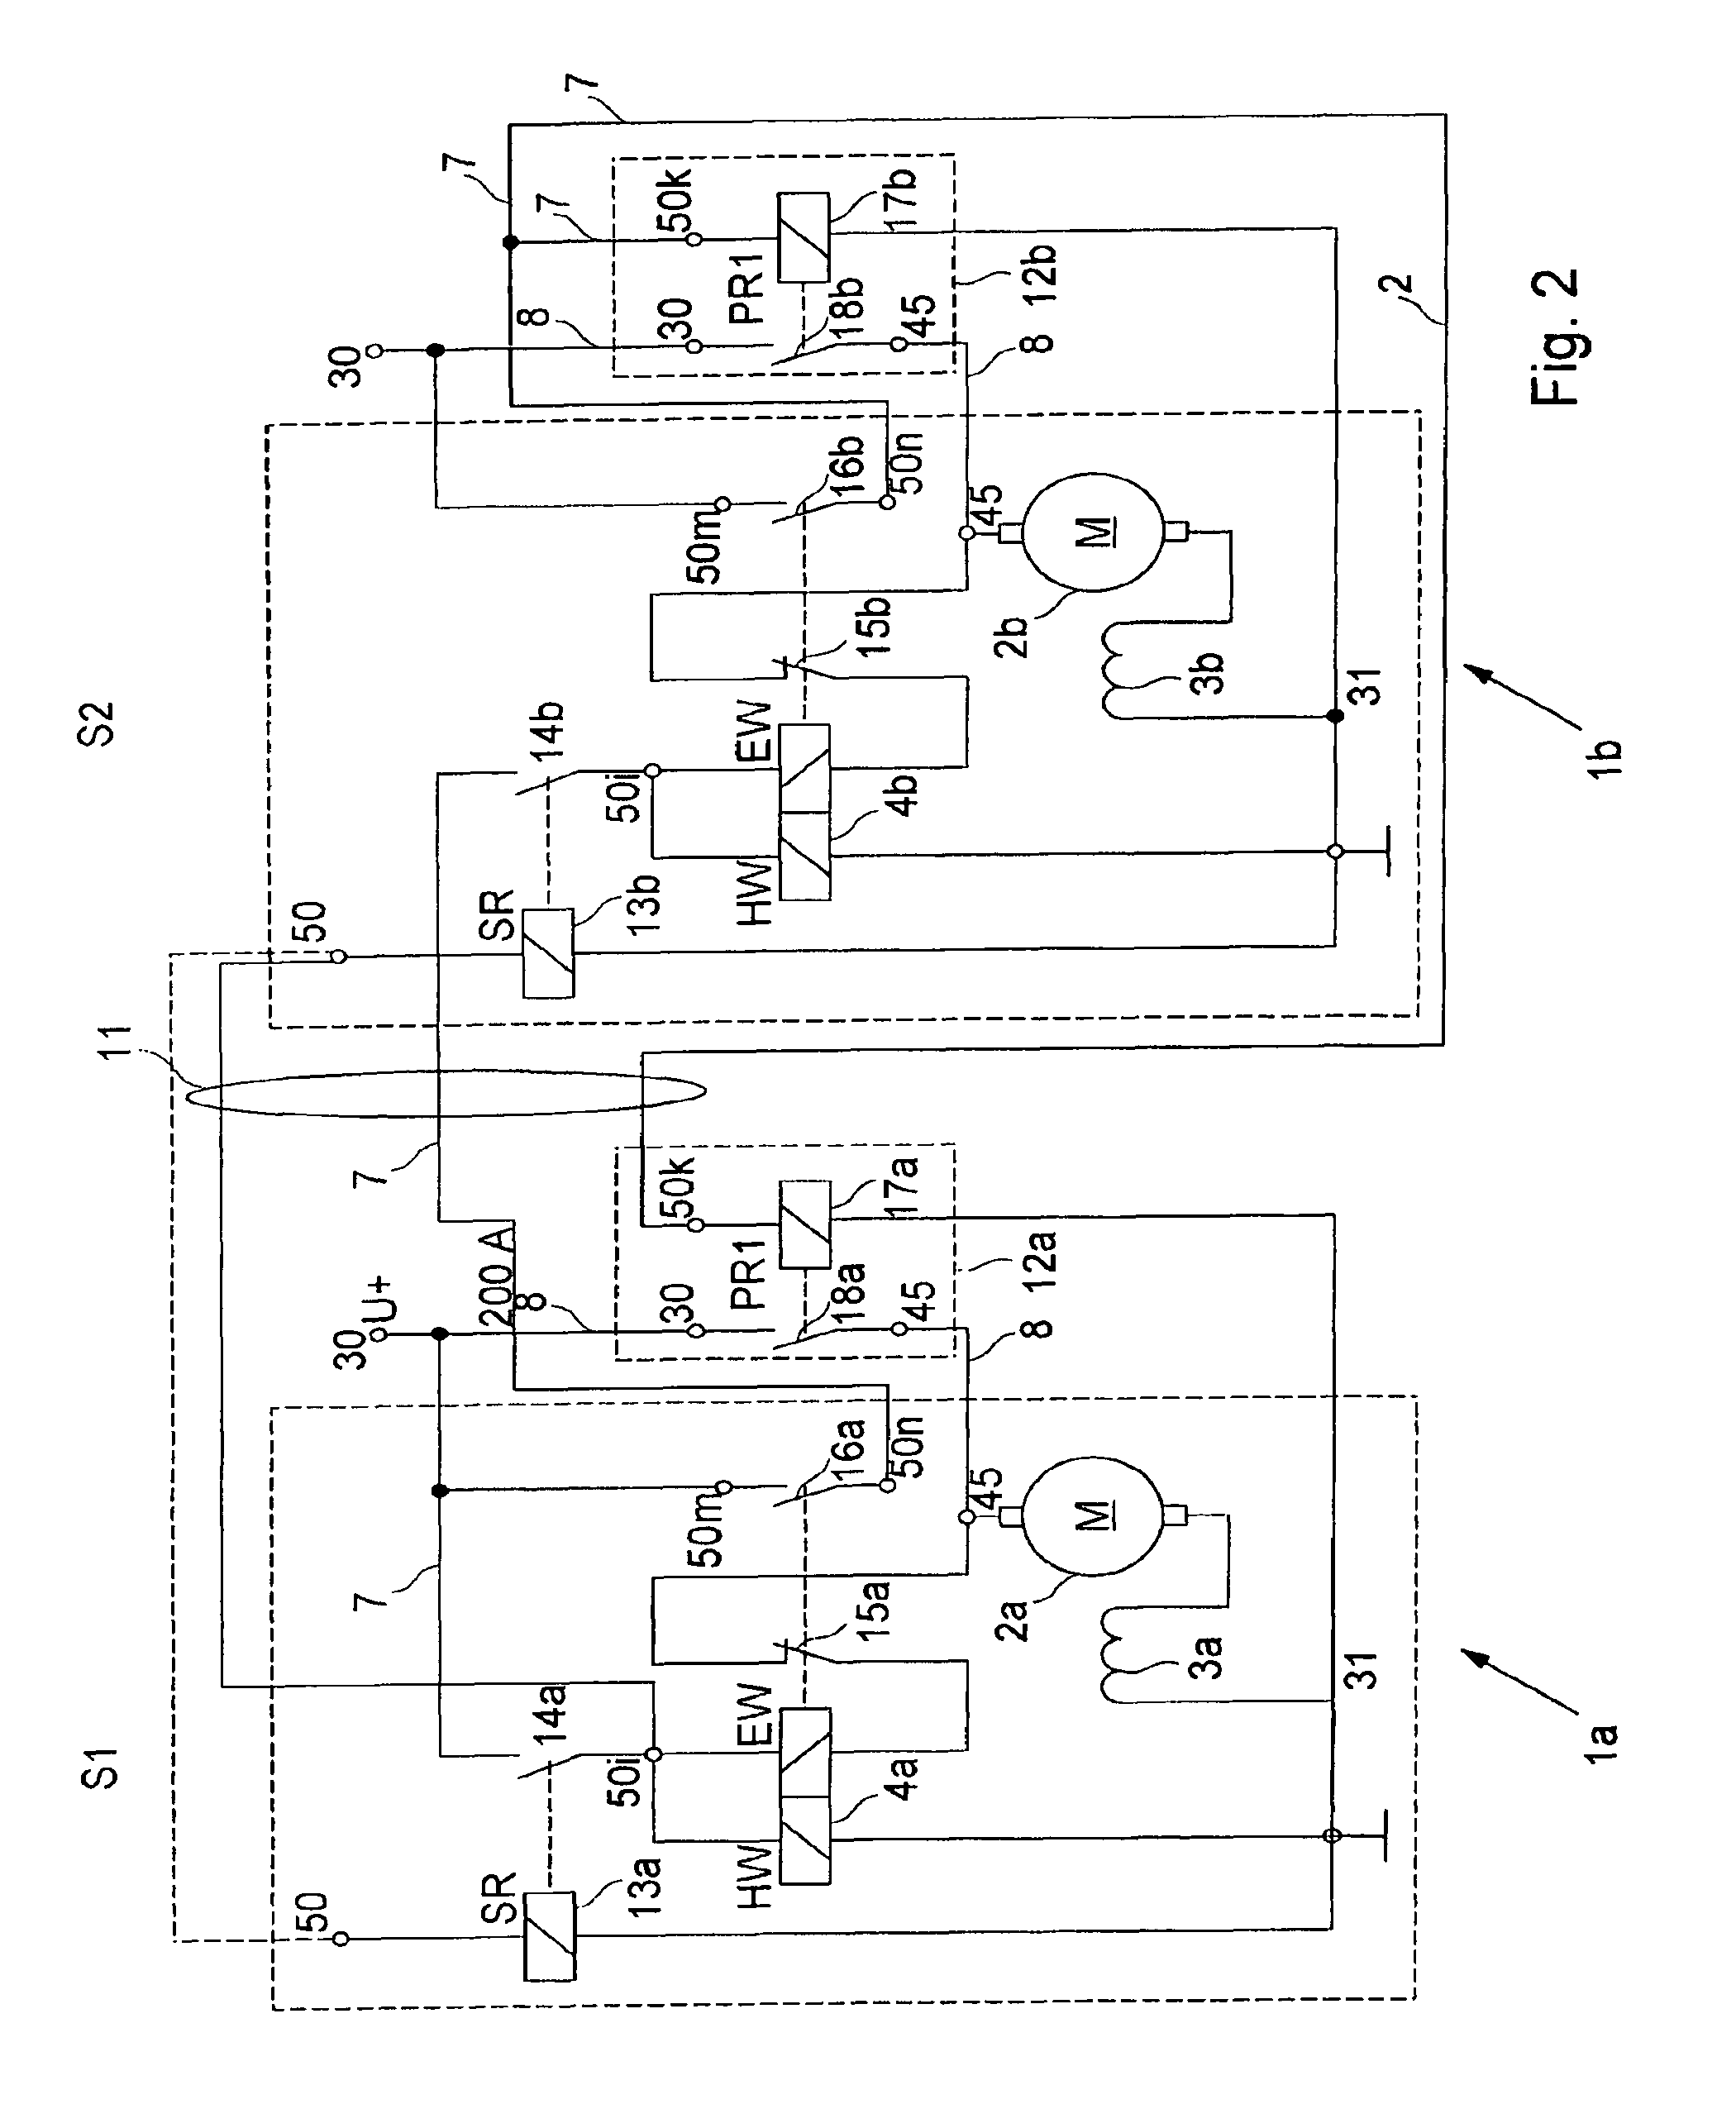 Parallel starting system having a low wiring expenditure